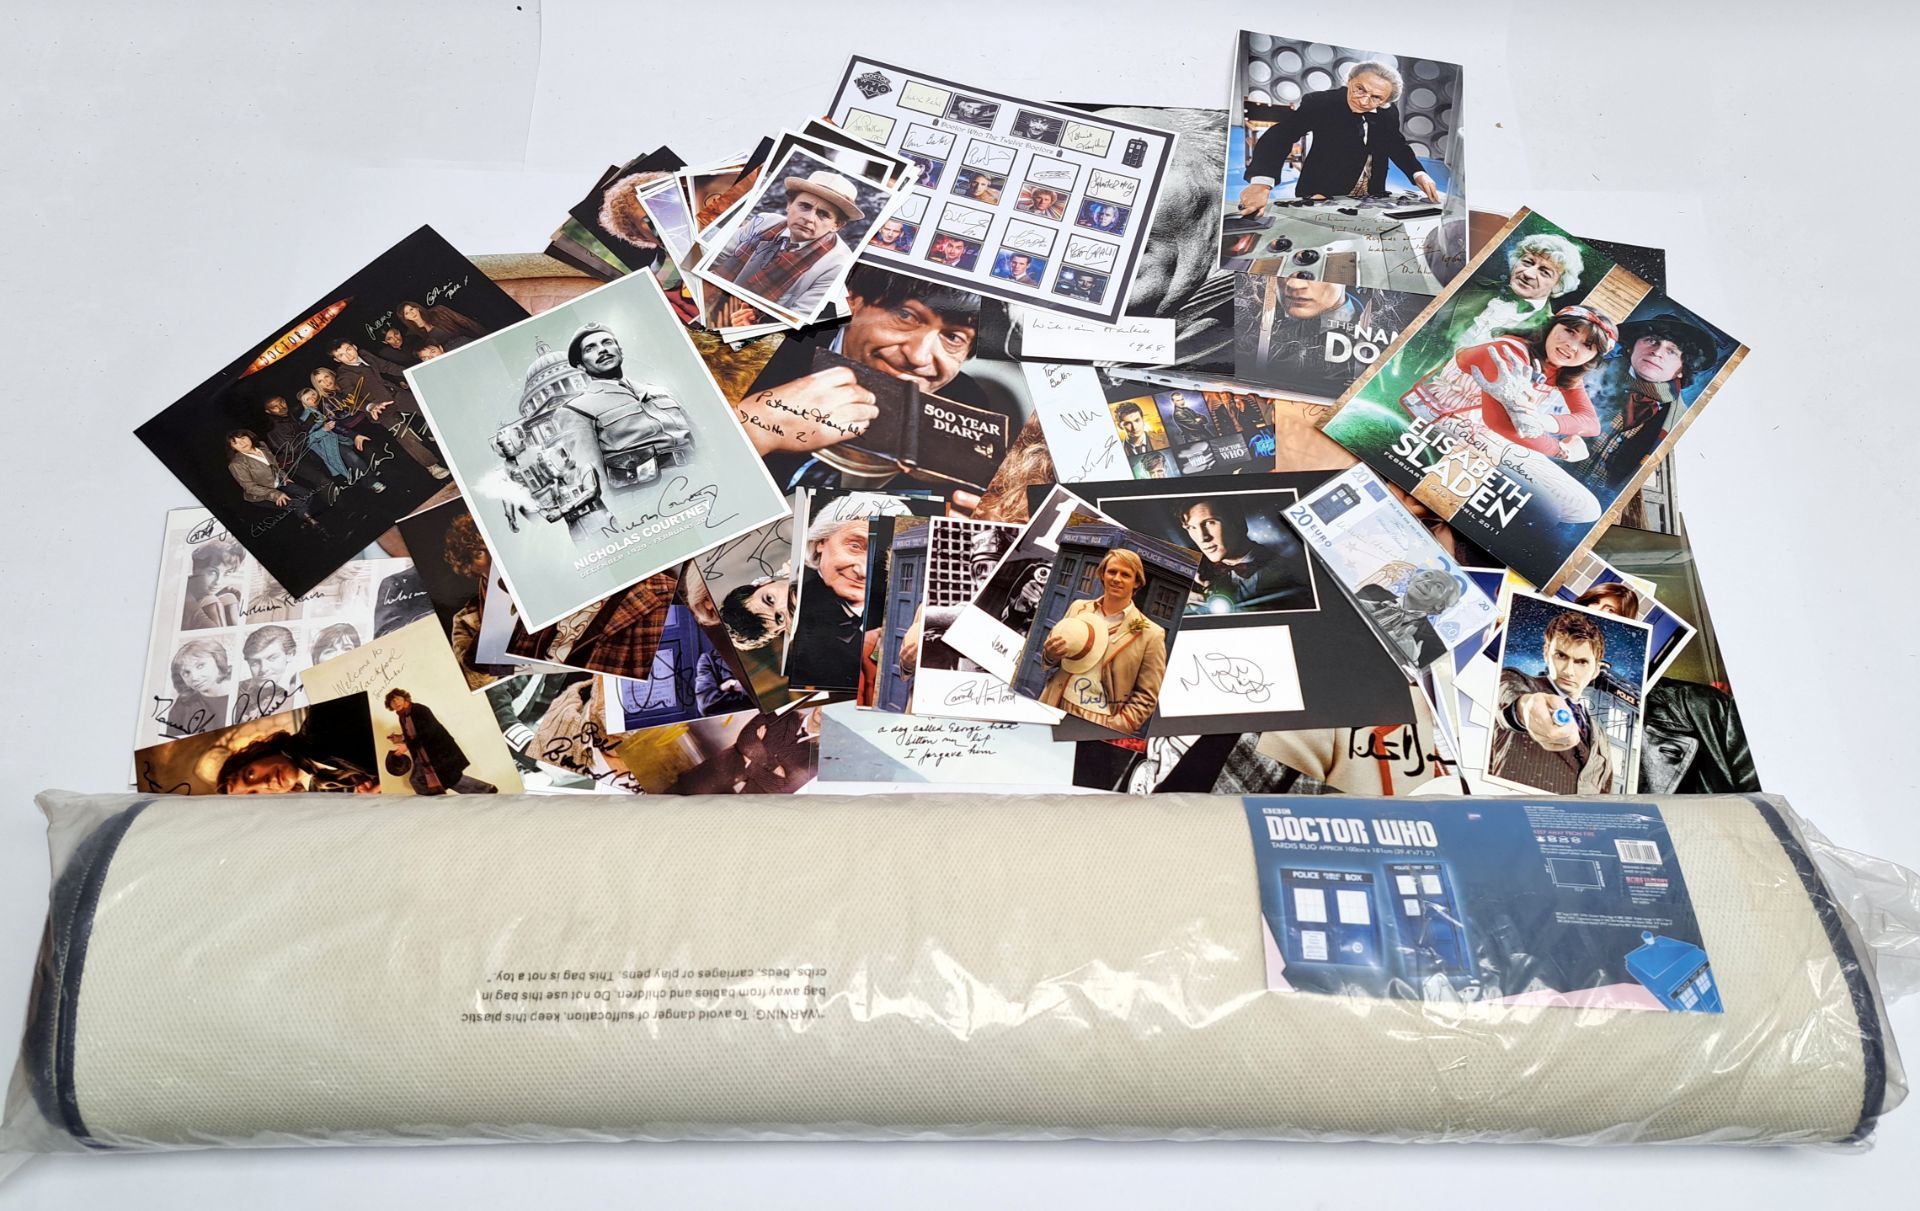 Robe Factory Doctor Who TARDIS rug & a large quantity of pre-printed signed Doctor Who photos & p...